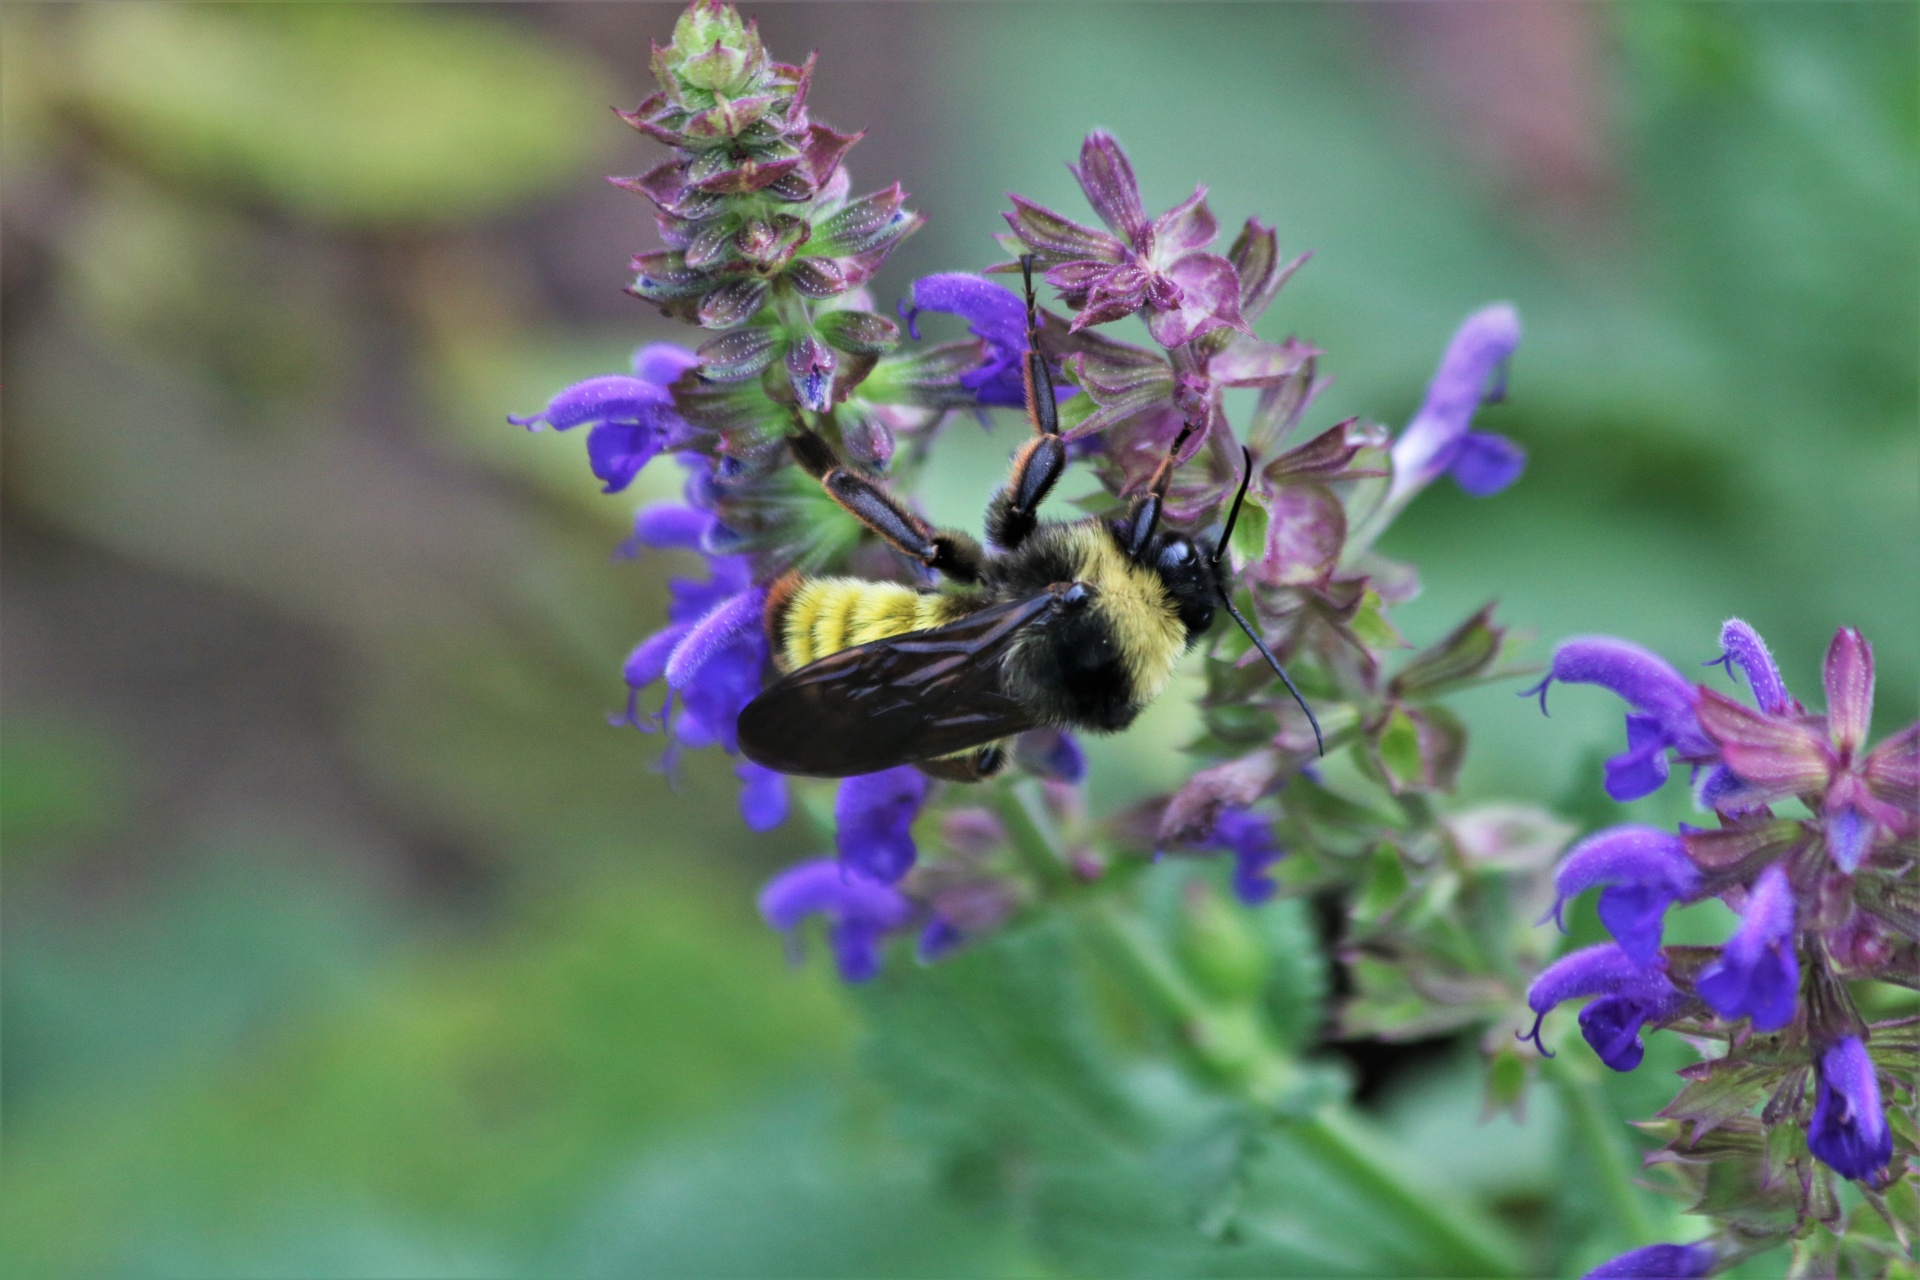 Close-up of a bumble bee on purple salvia flowers.